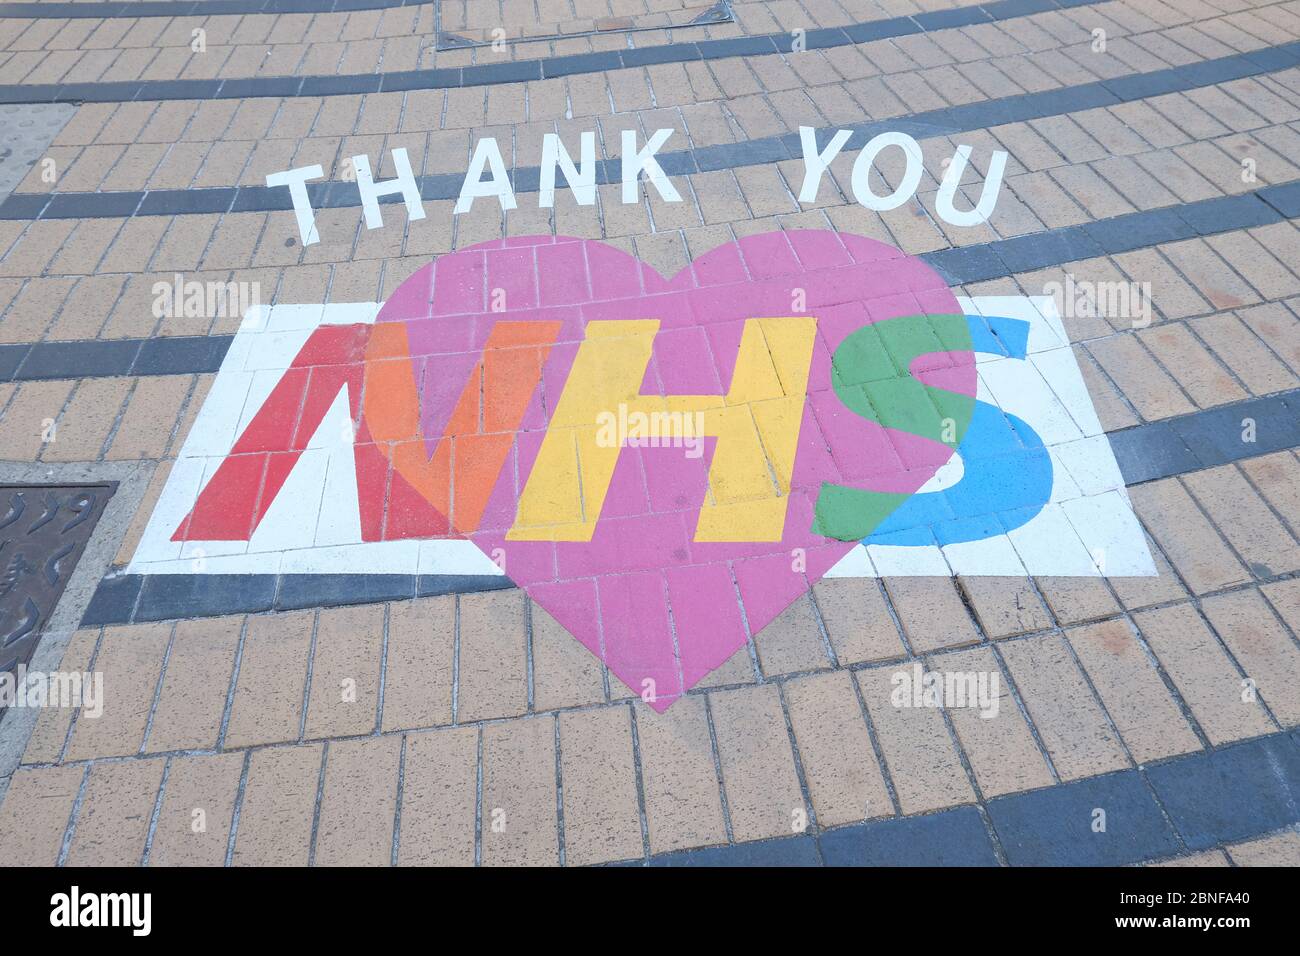 'Thank you NHS' message placed by local authority Merton Council to thank hospital workers during the coronavirus pandemic in 2020. Stock Photo